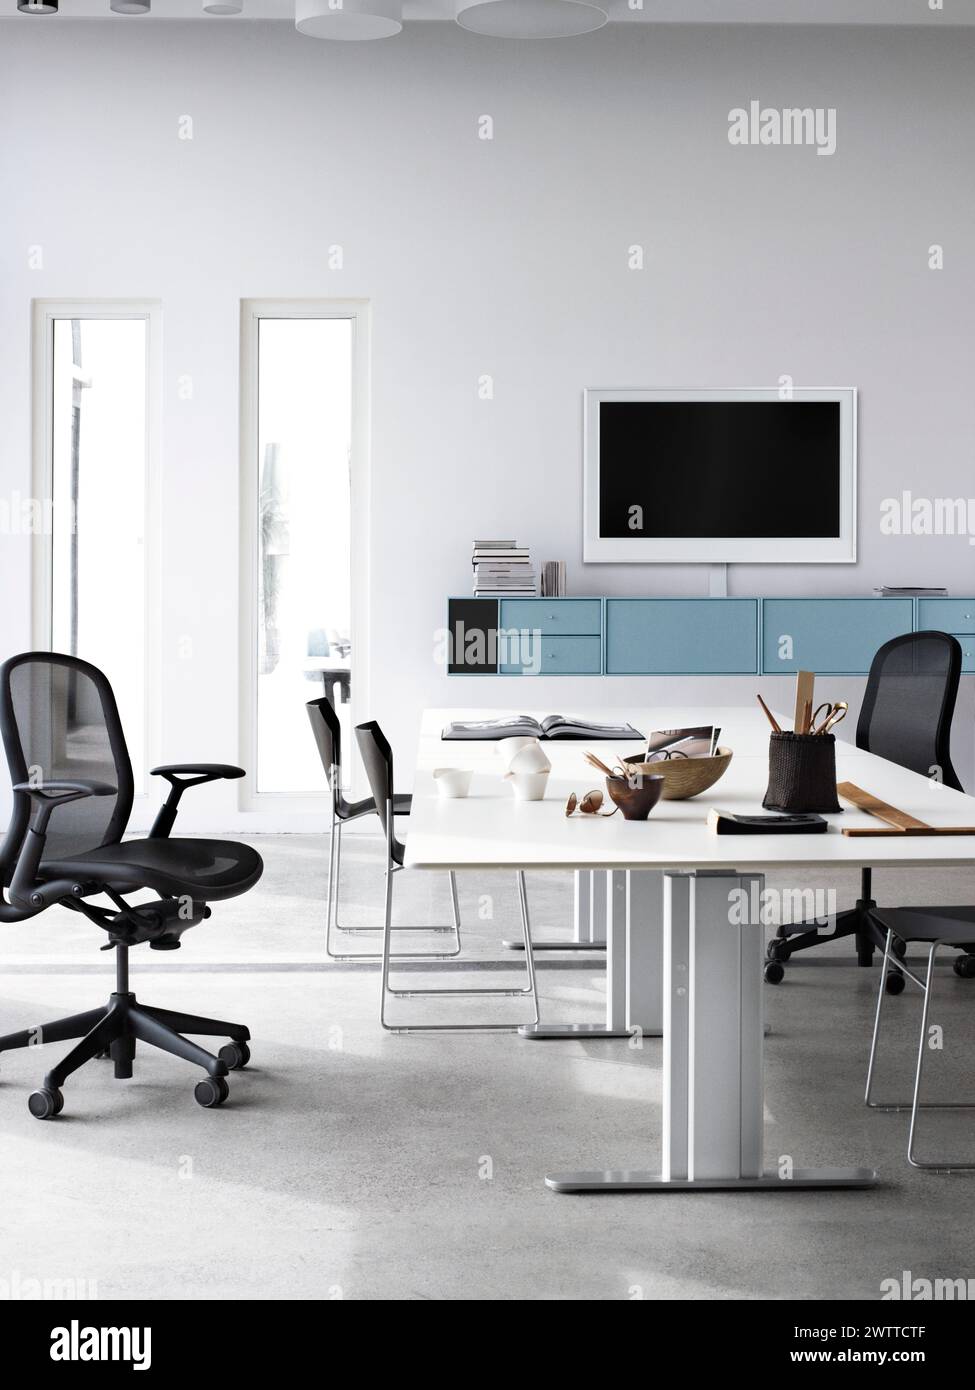 Minimalist office space with a clean, modern design Stock Photo